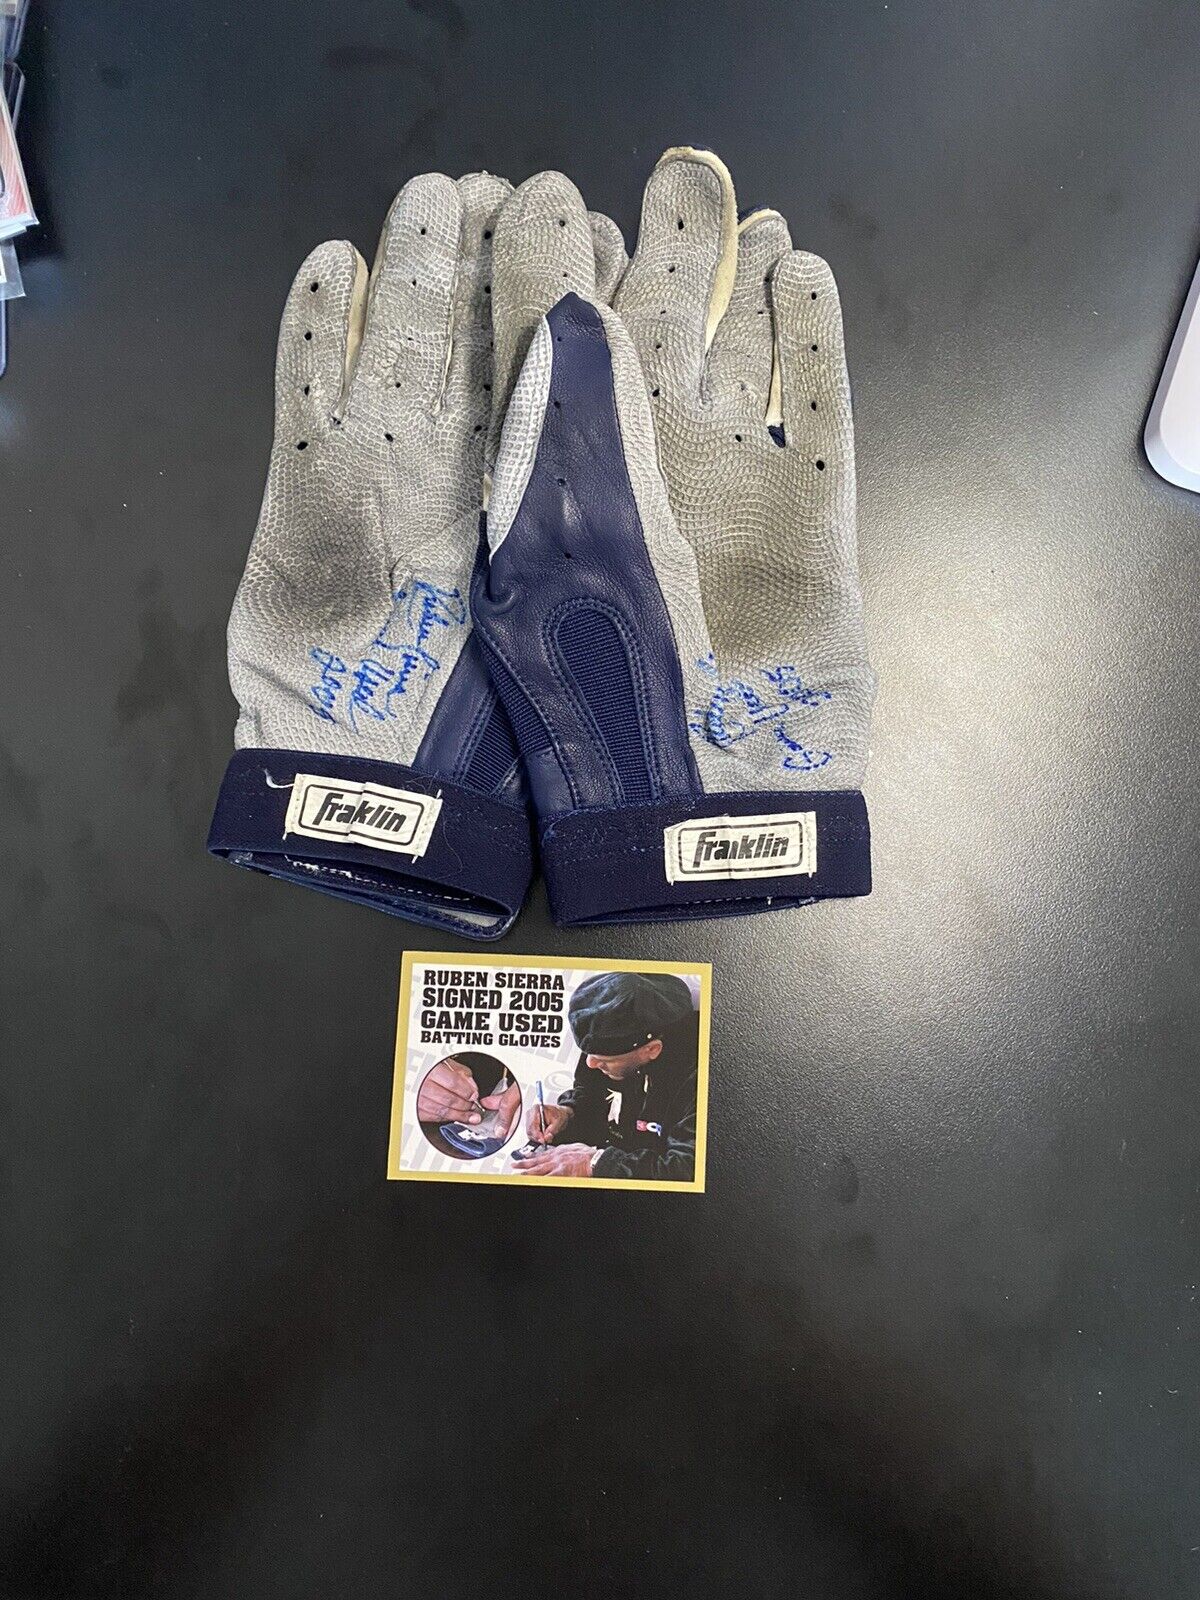 Ruben Sierra Signed Game Used Batting Gloves - Authenticated by Elite